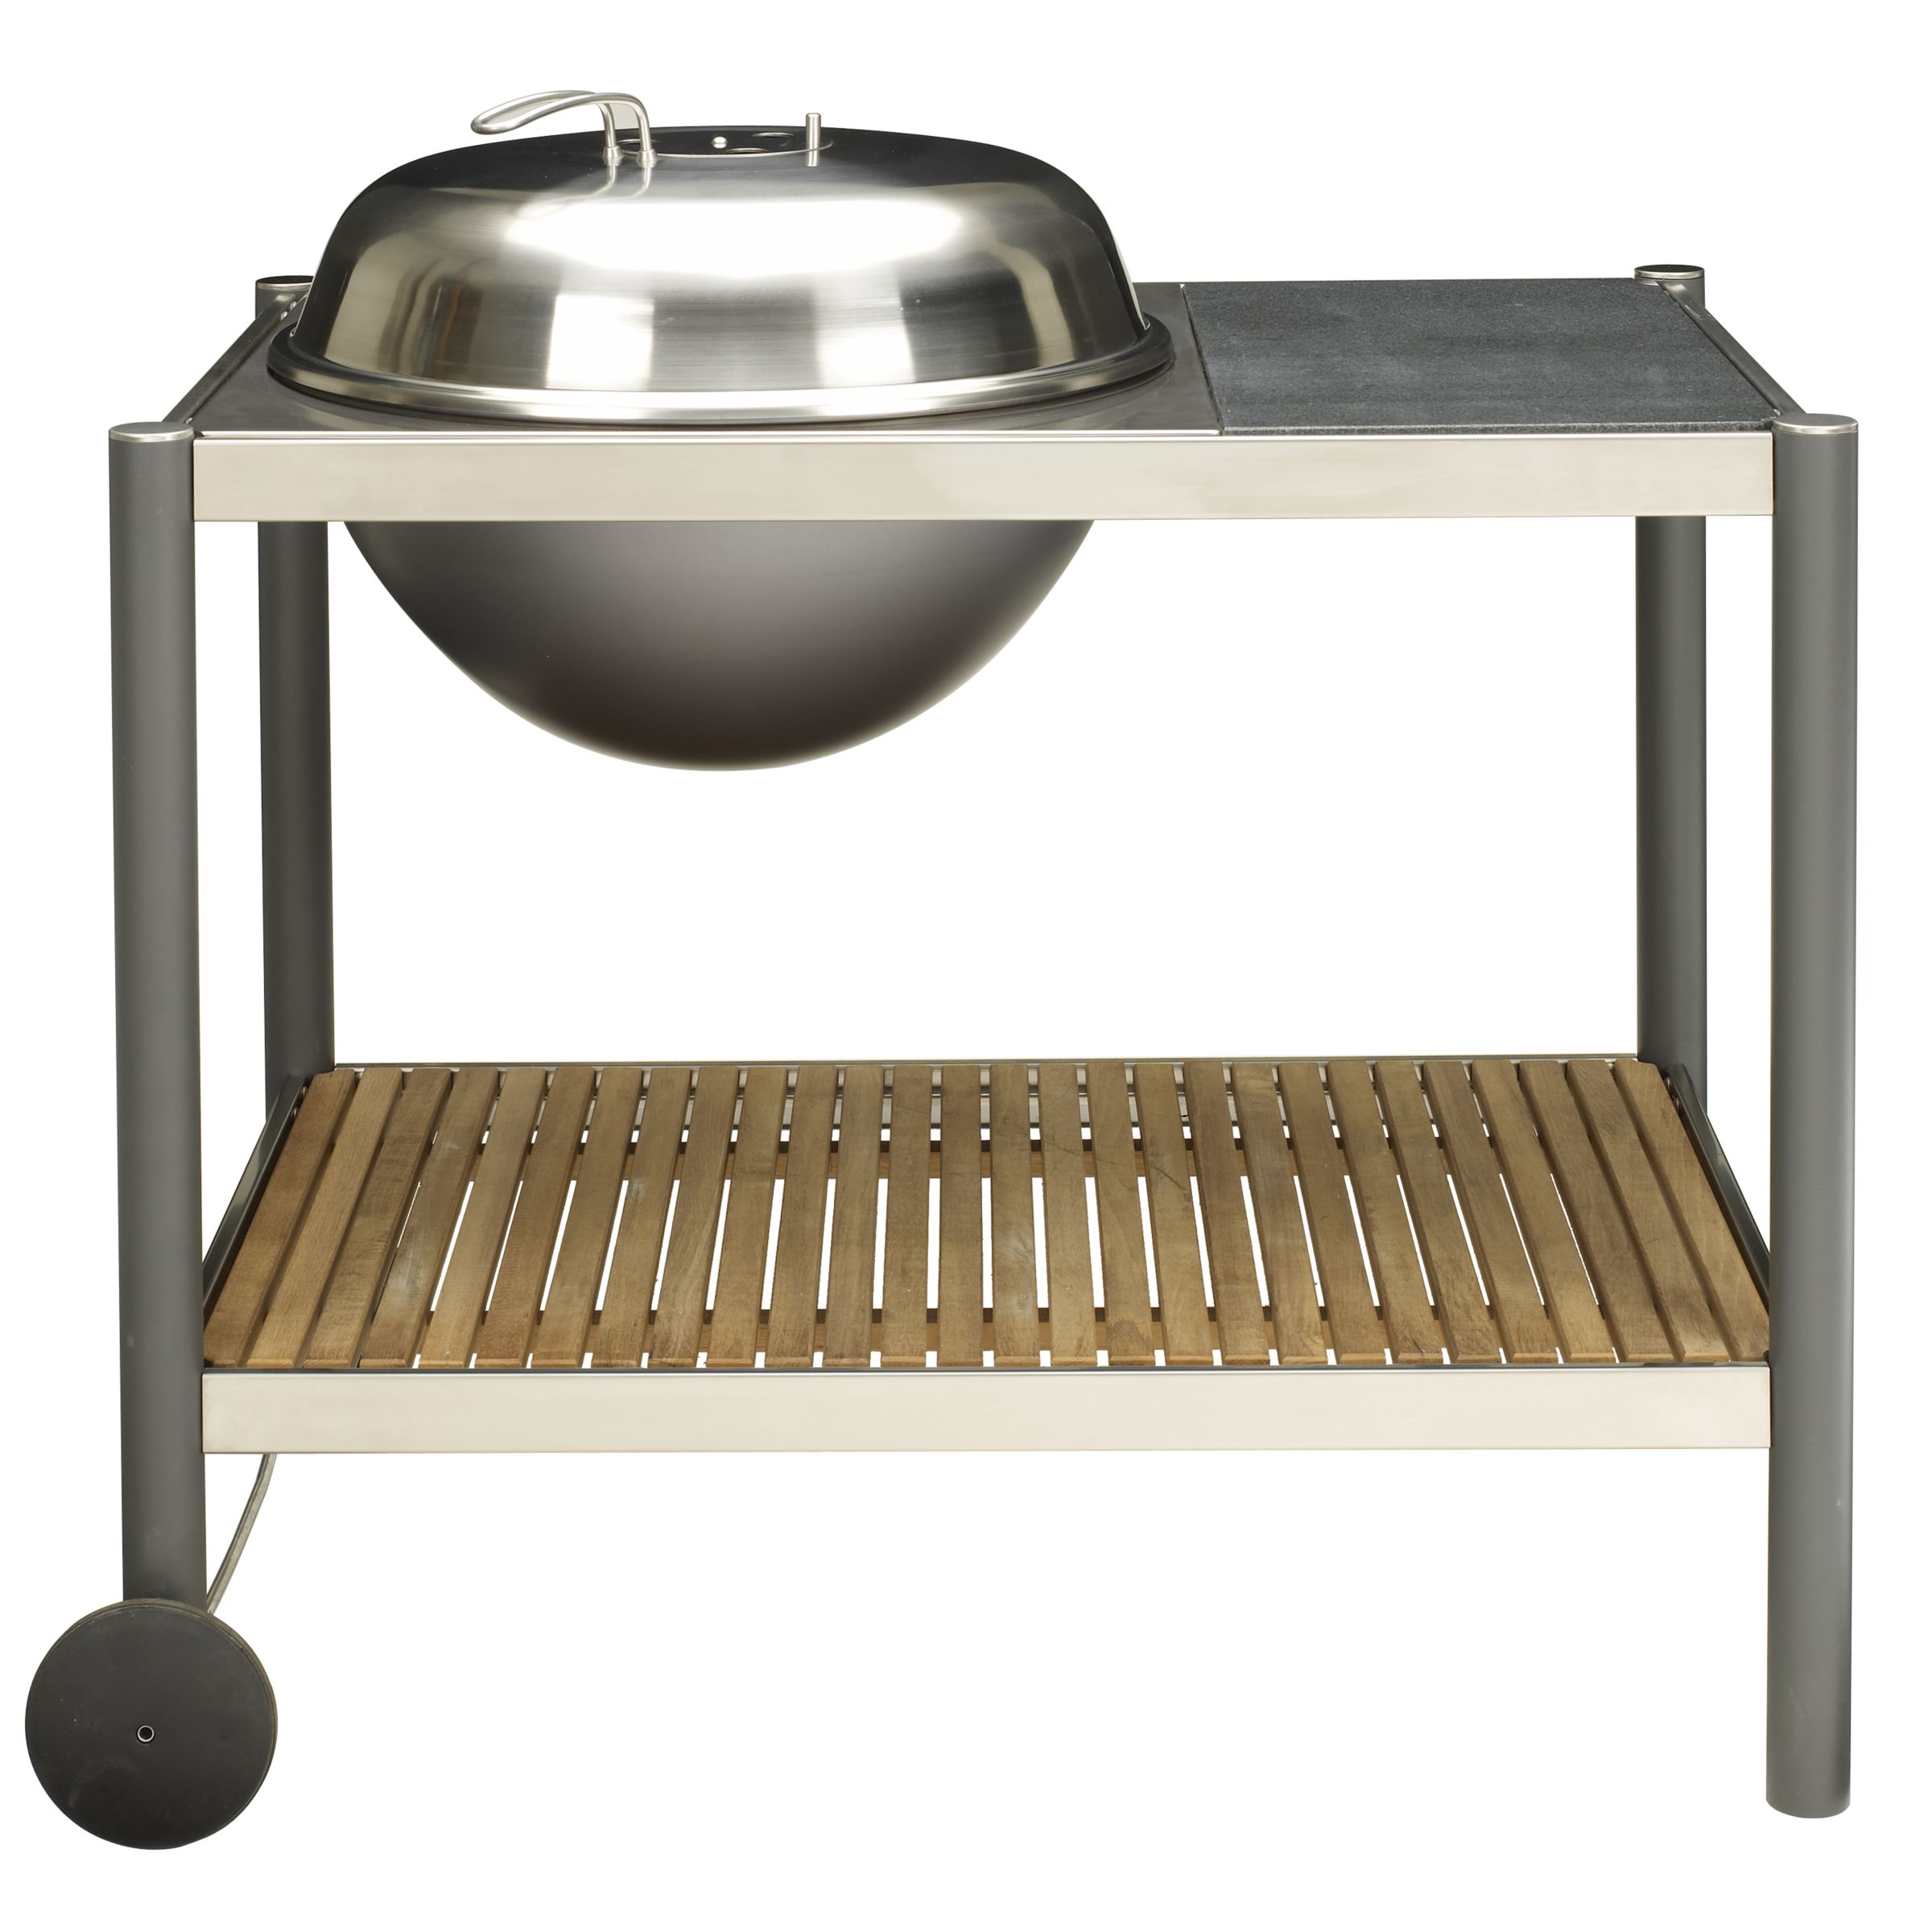 John Lewis JLT1 Trolley Charcoal Barbecue with Cover at John Lewis